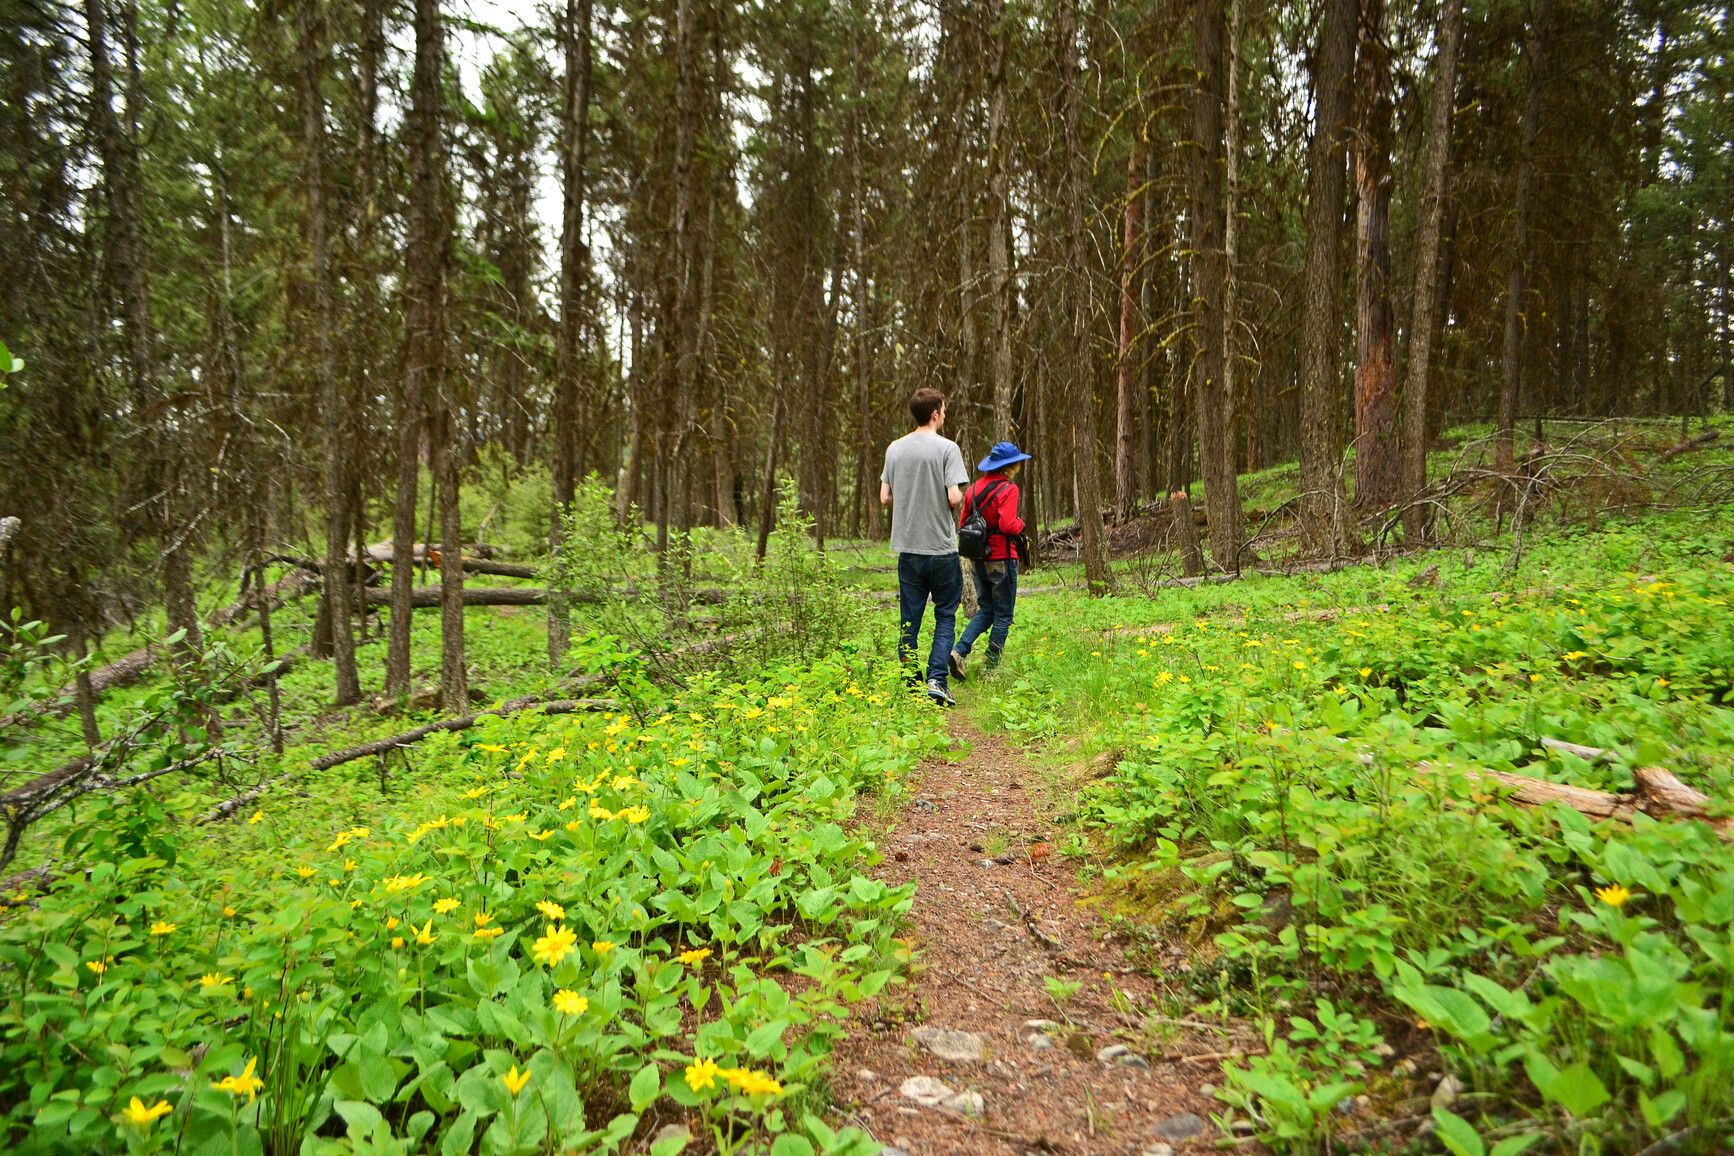 Amidst nature's beauty, park visitors hike a trail bordered by vibrant ground flowers, near the forest of Johnstone Creek Park.